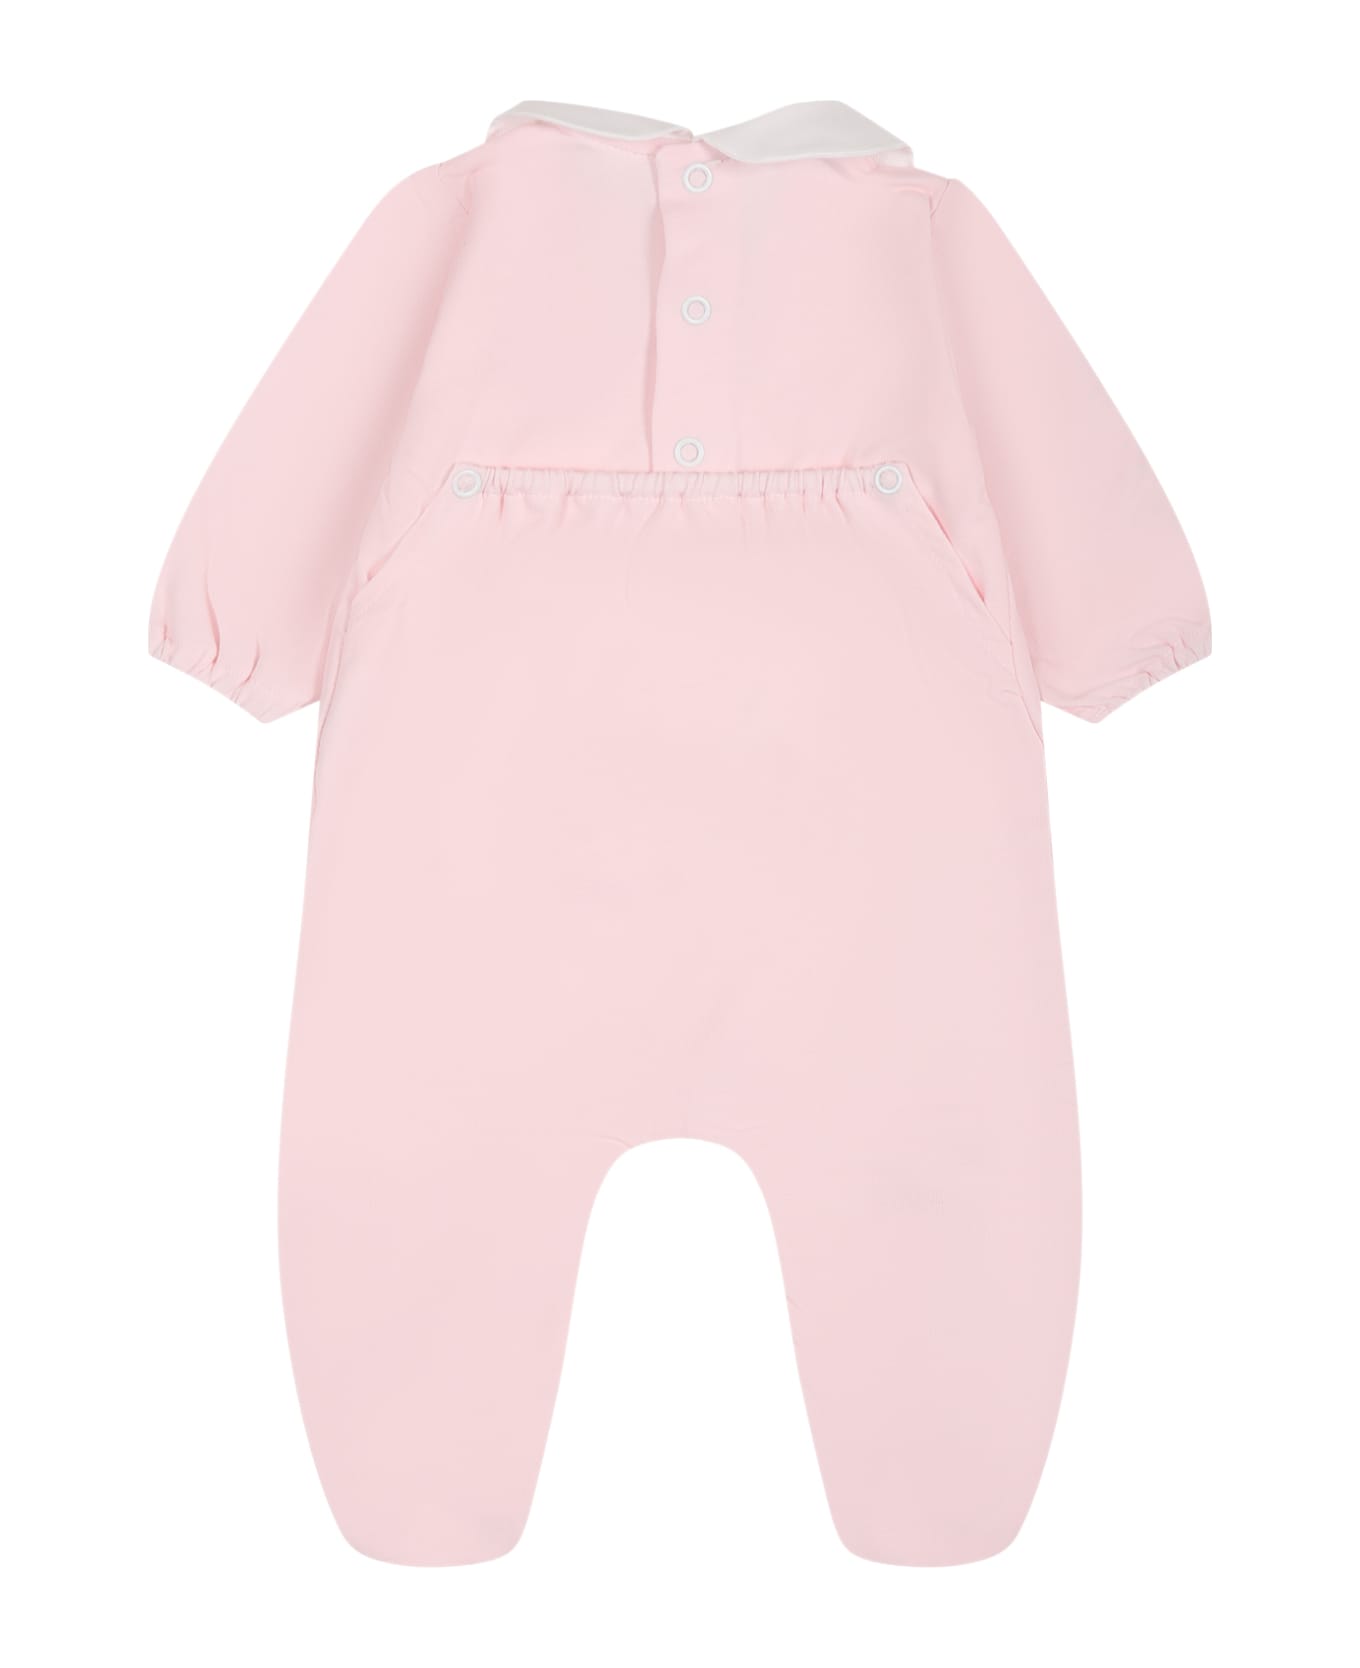 Little Bear Pink Onesie For Baby Girl With Writing And Heart - Rosa